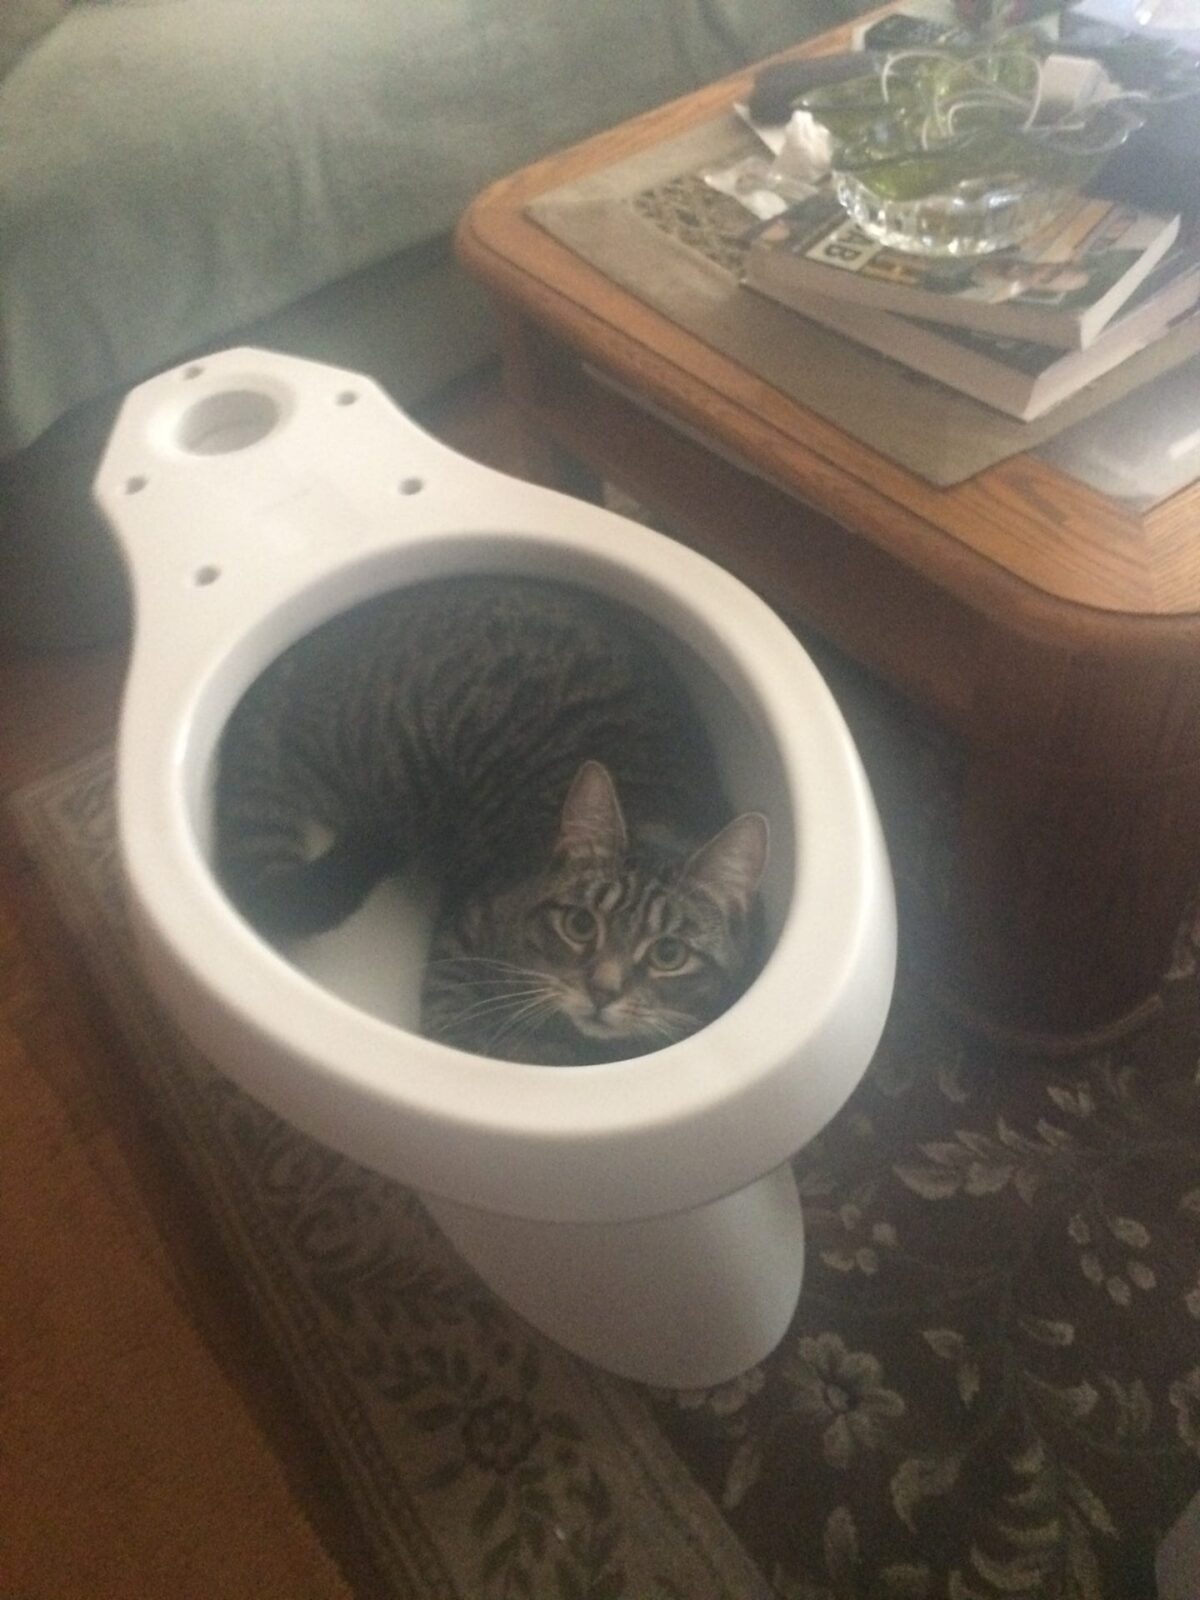 Top view of a cat in toilet tab